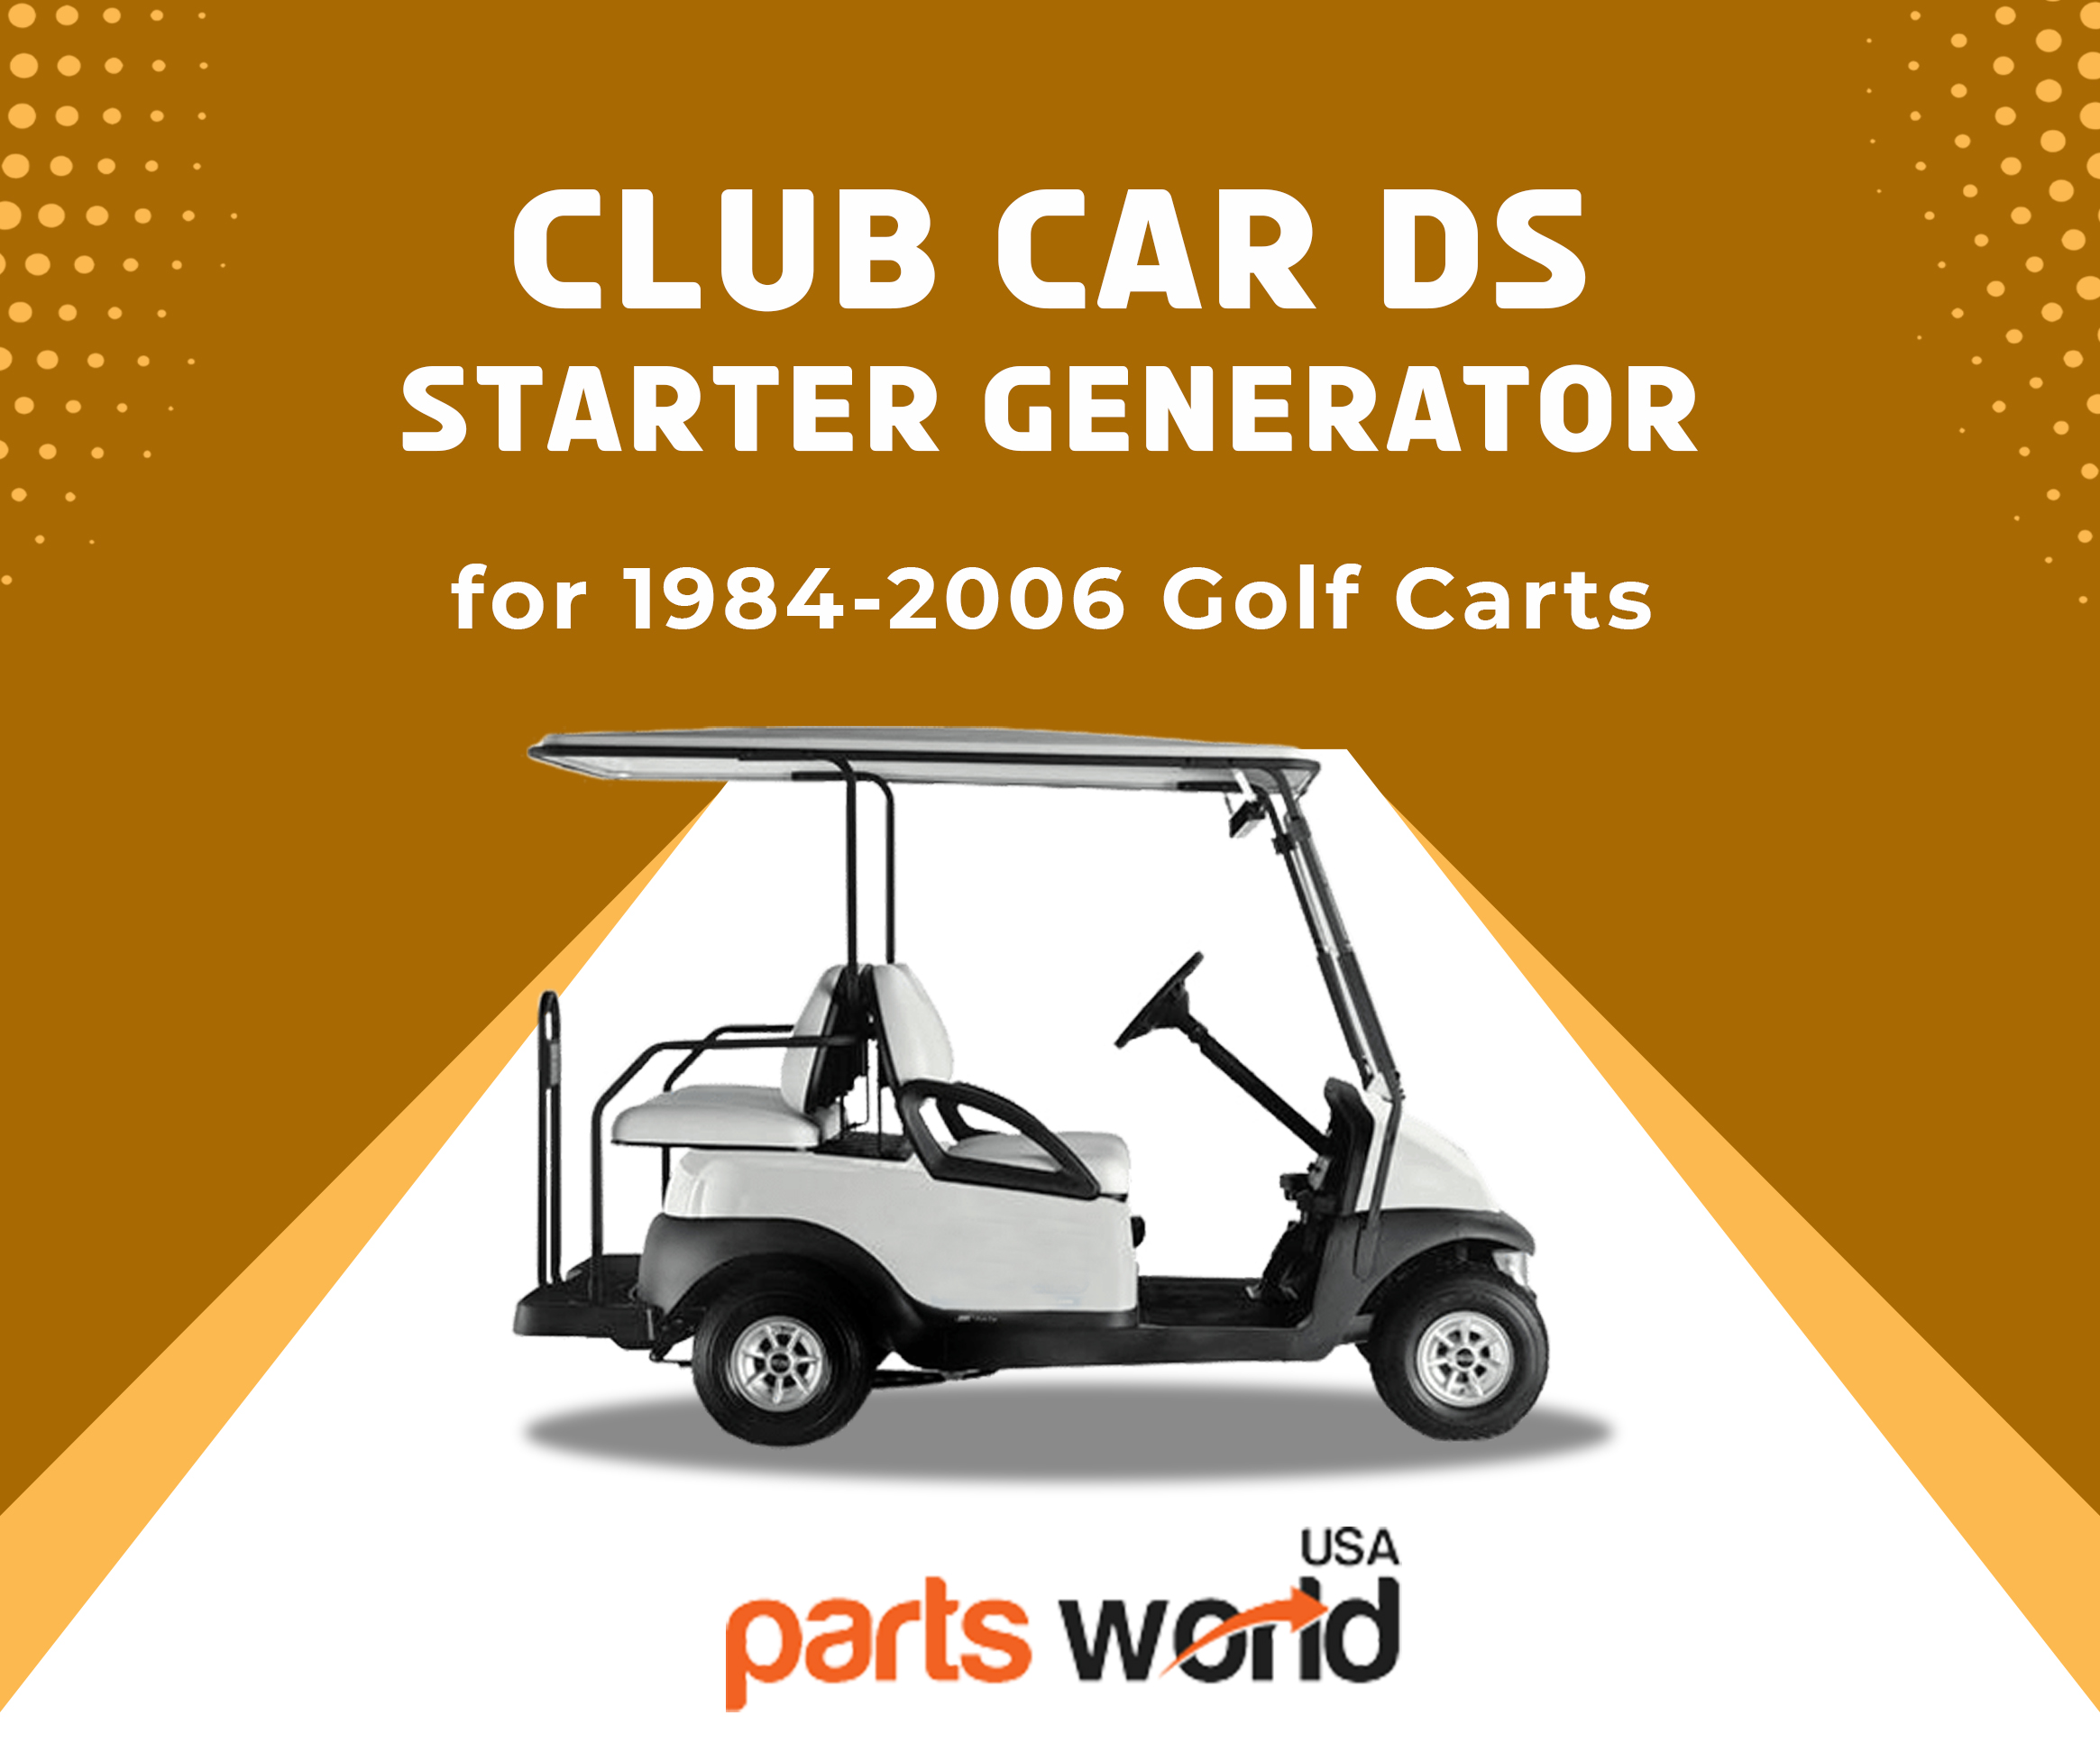 Club Car DS Starter Generator for 1984-2006 Golf Carts